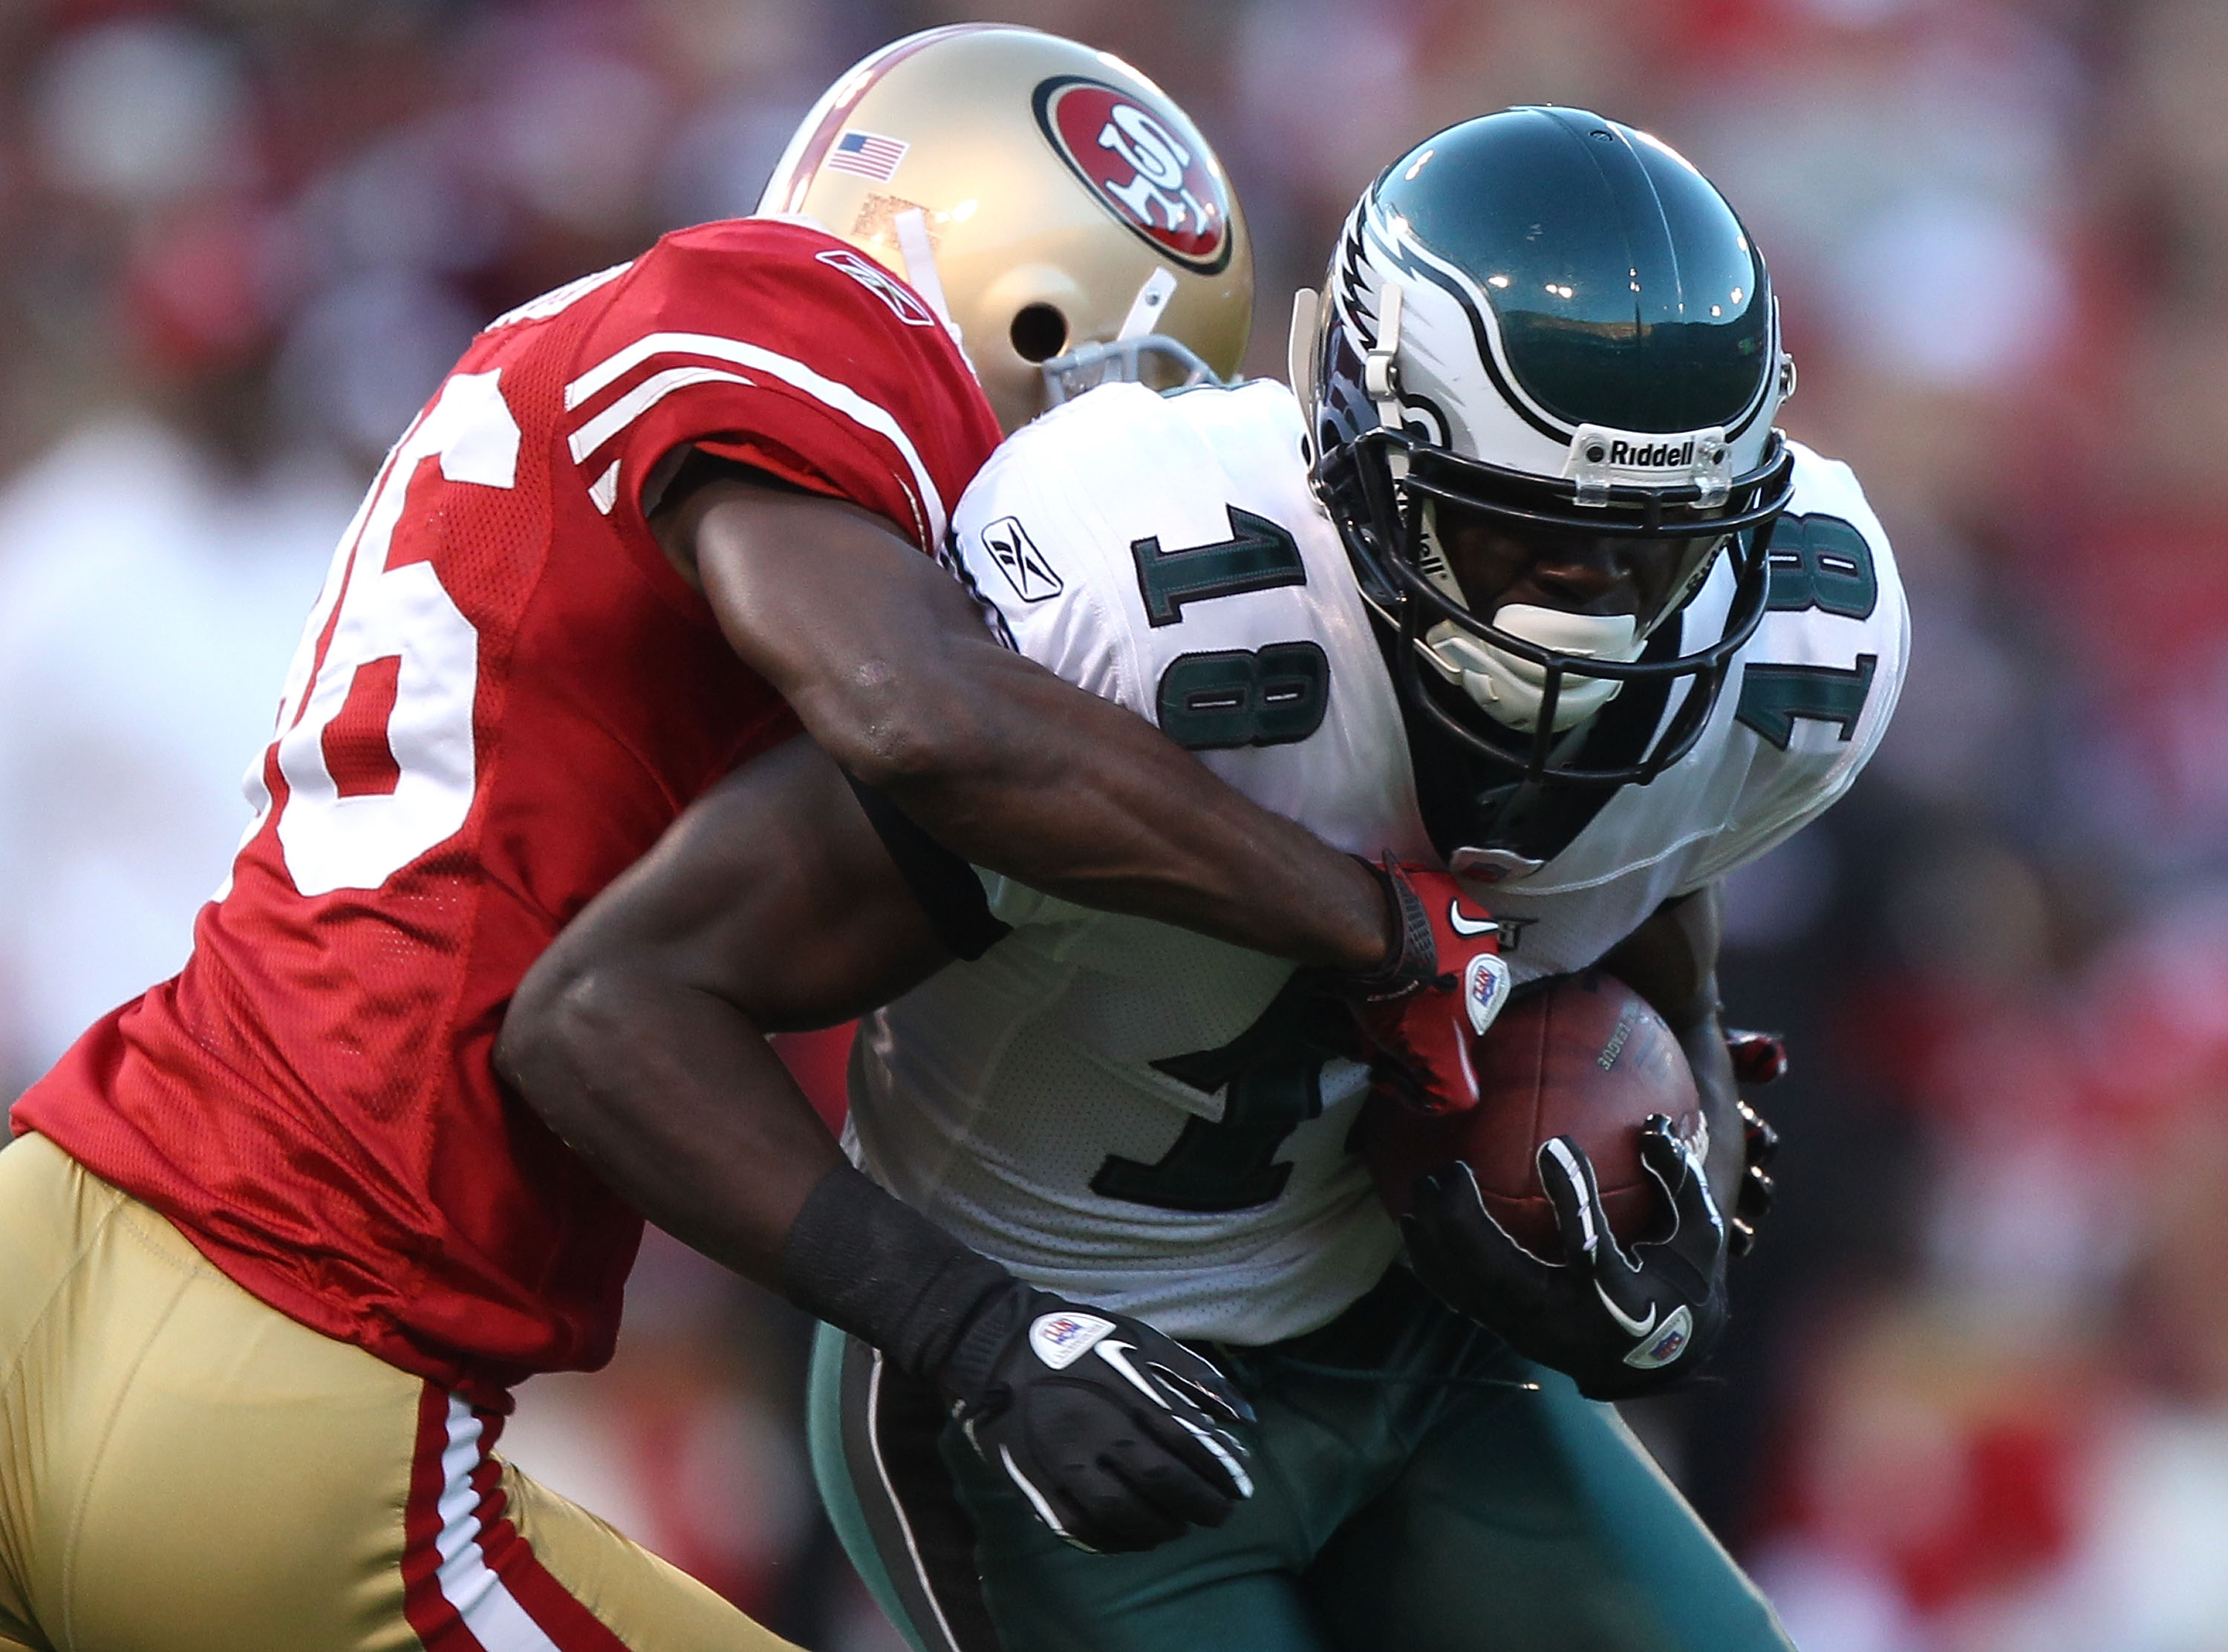 Maclin's big game spoiled by Eagles loss – The Morning Call